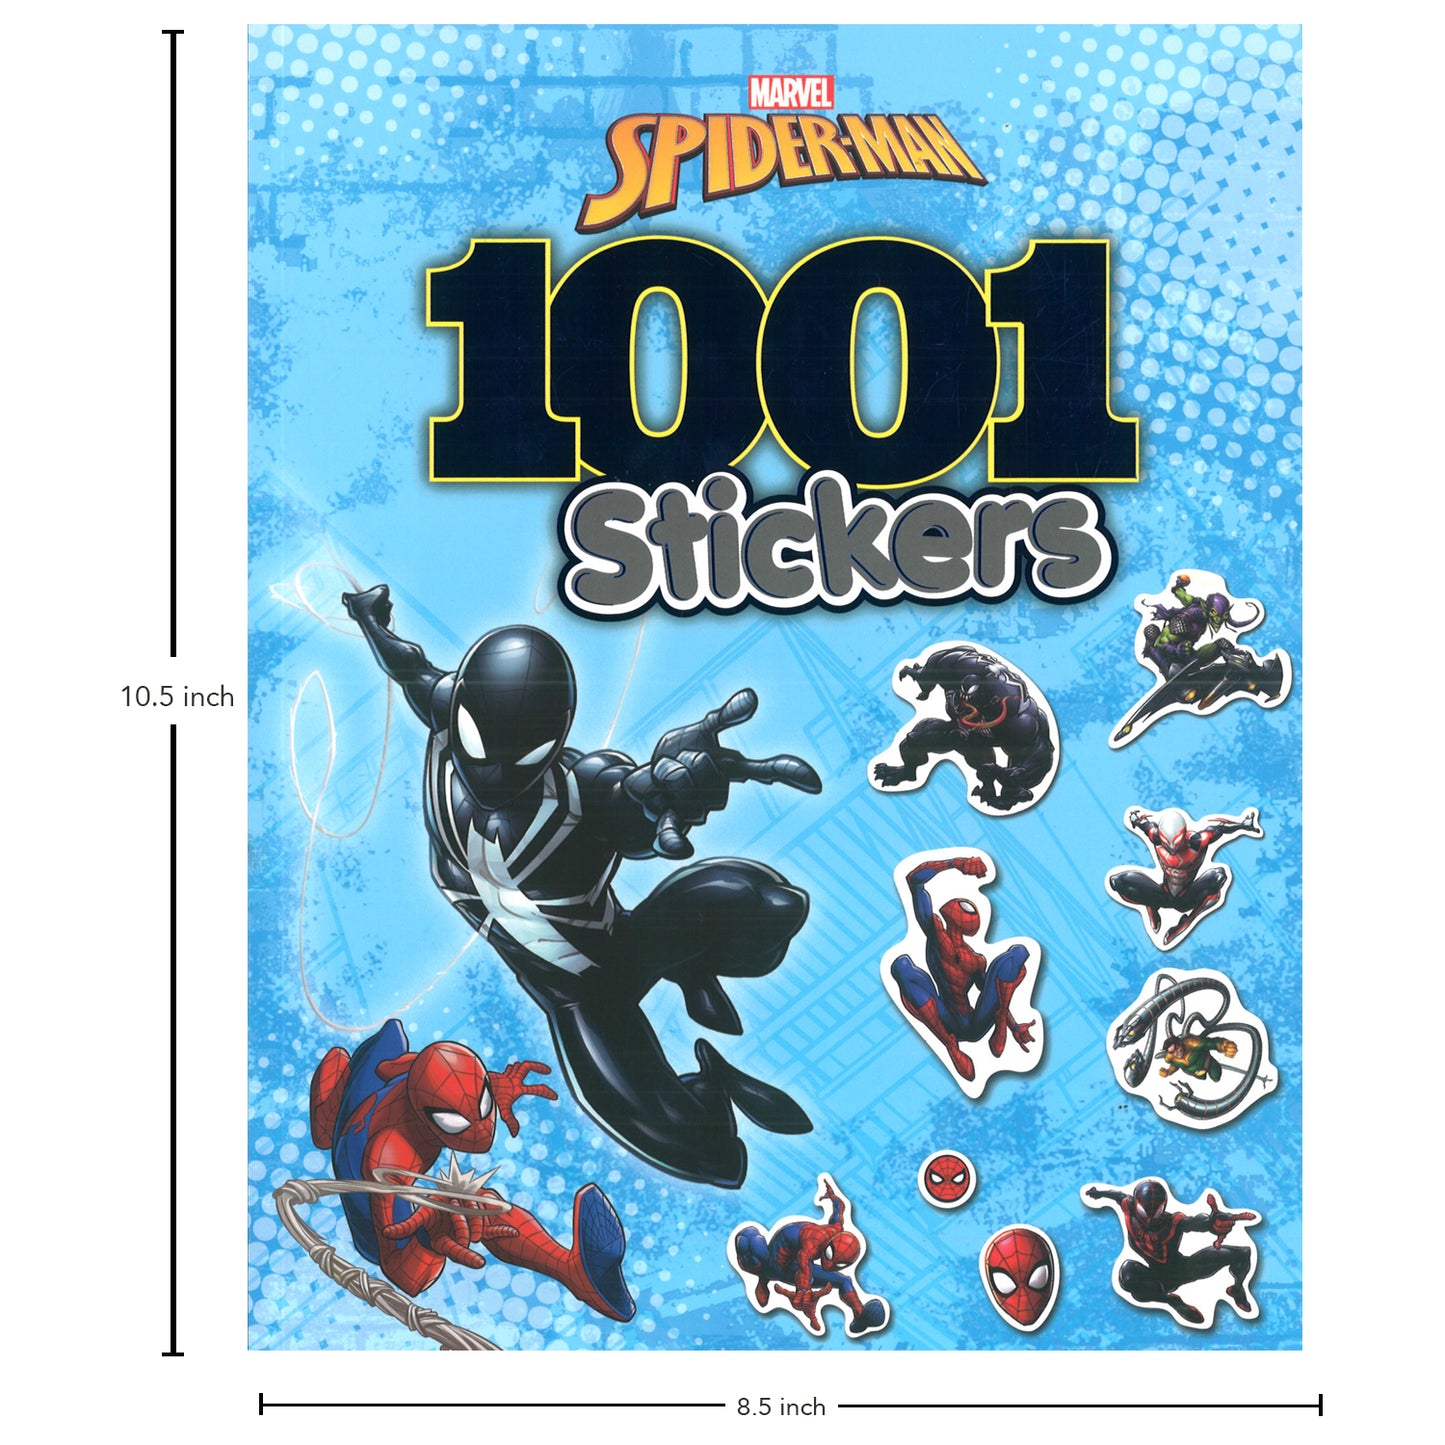 Marvel Spider-Man 1001 Stickers Book | Many Activities with Marvel Stickers for Kids